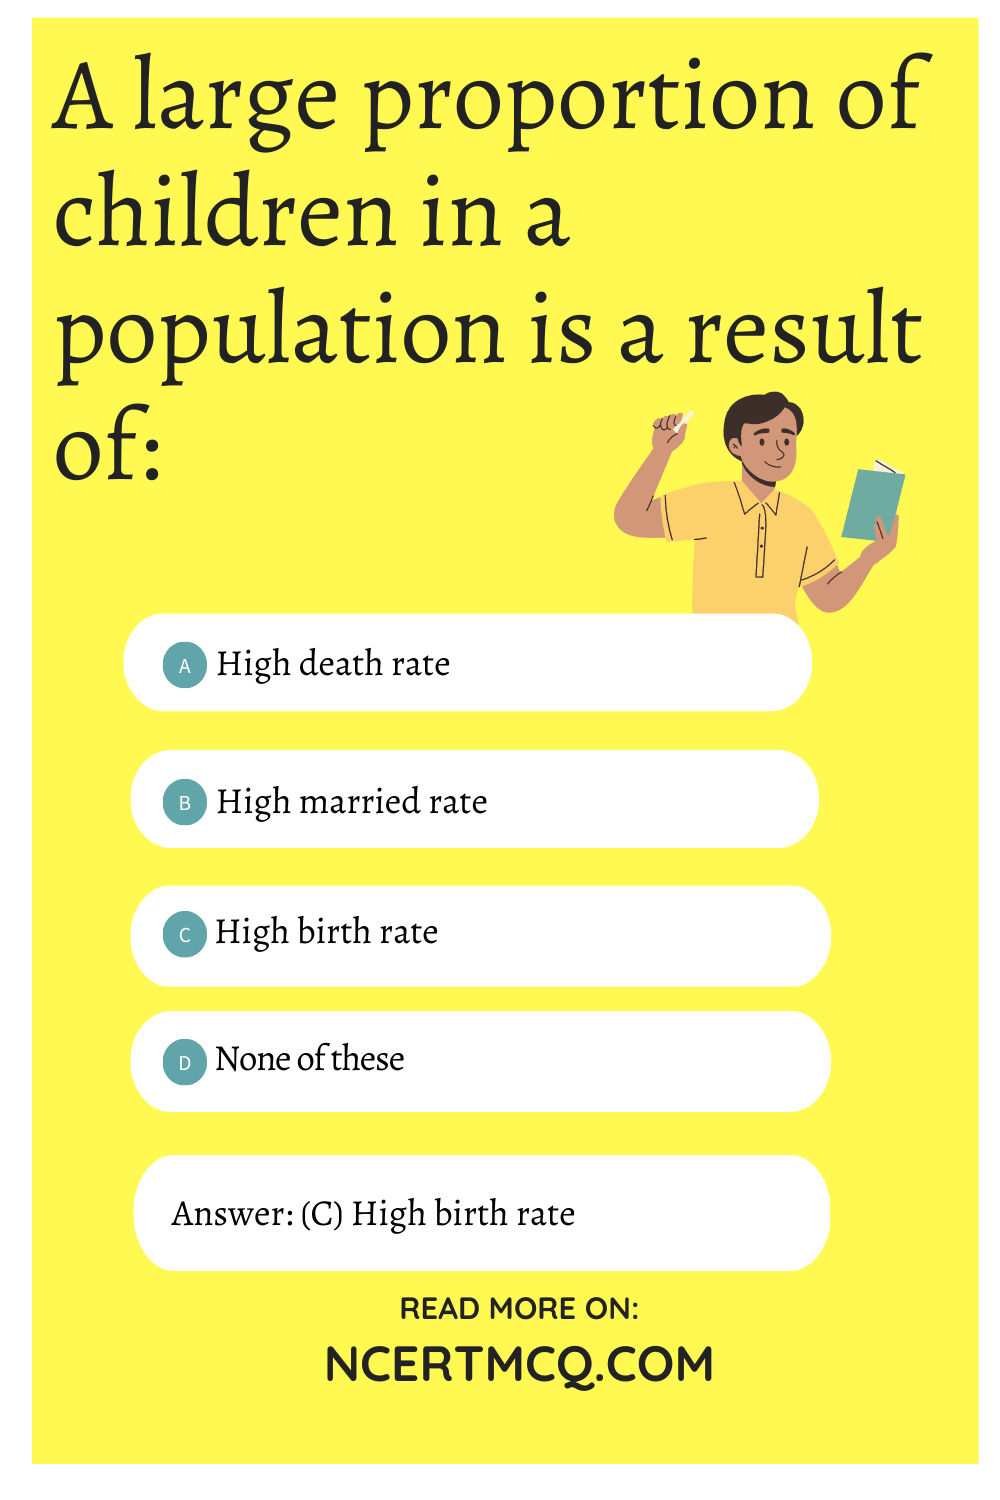 A large proportion of children in a population is a result of: